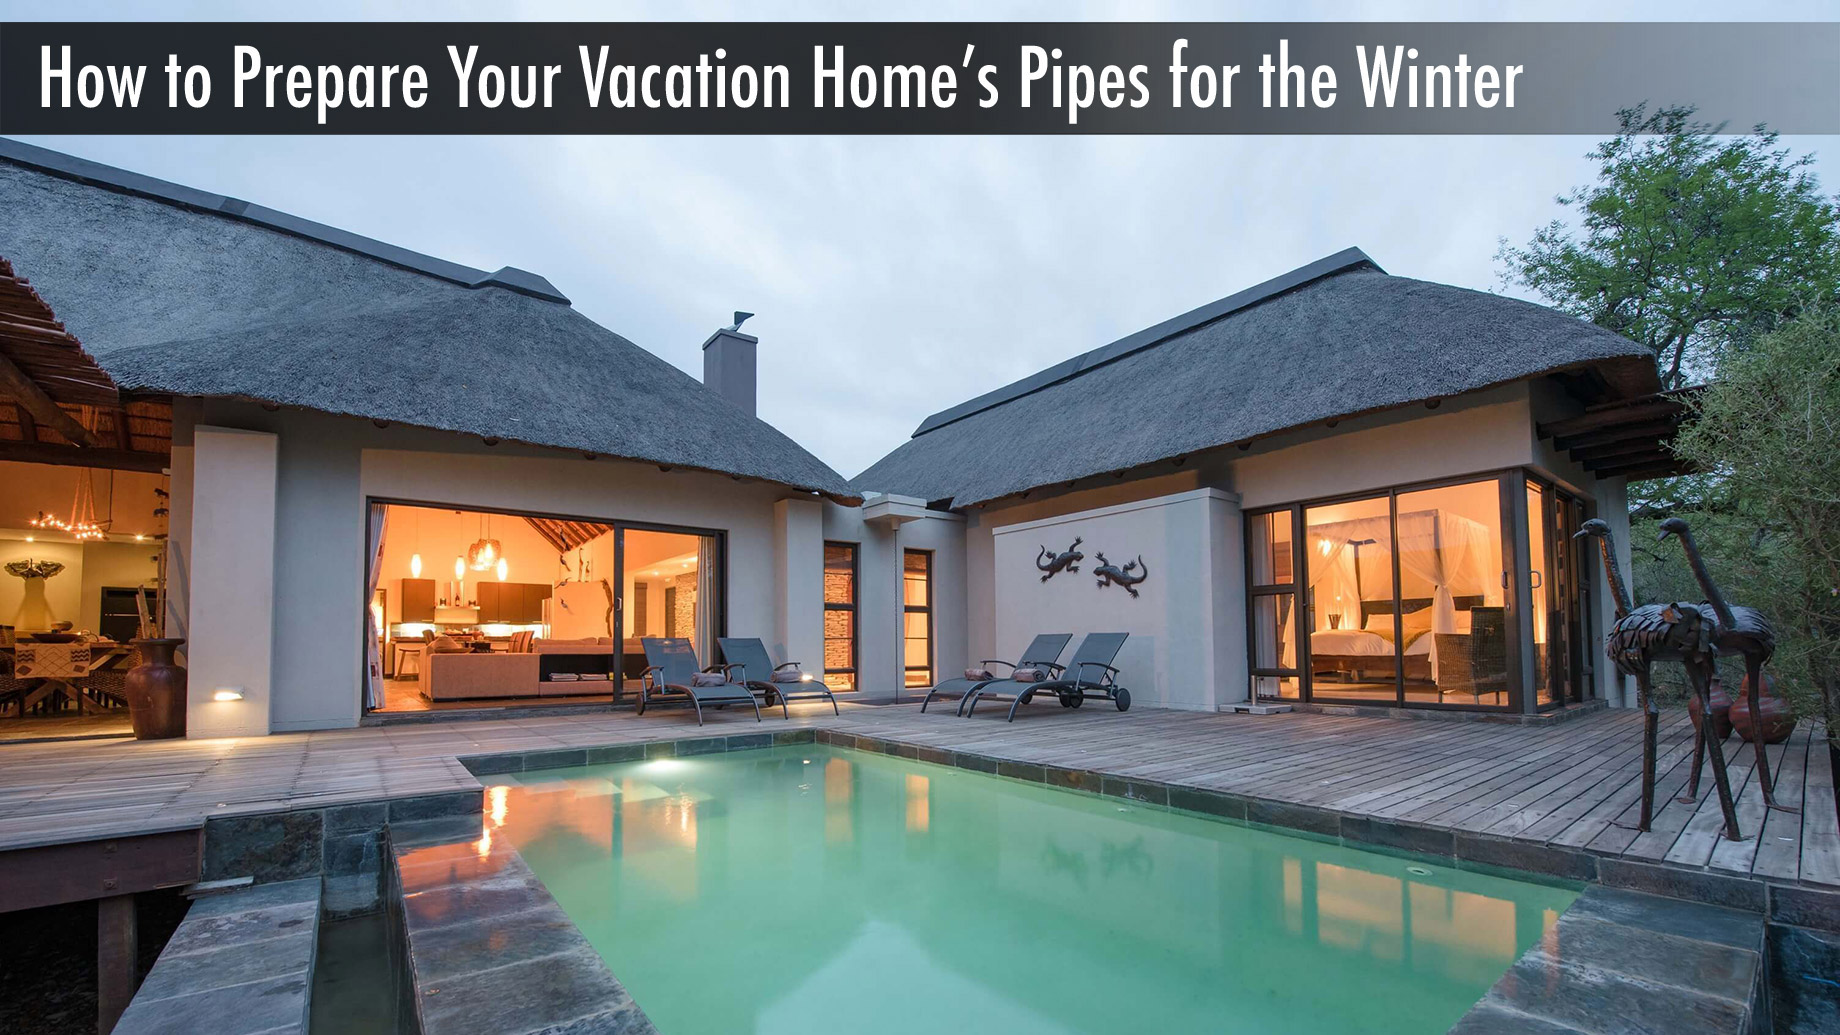 How to Prepare Your Vacation Home's Pipes for the Winter - The Pinnacle ...